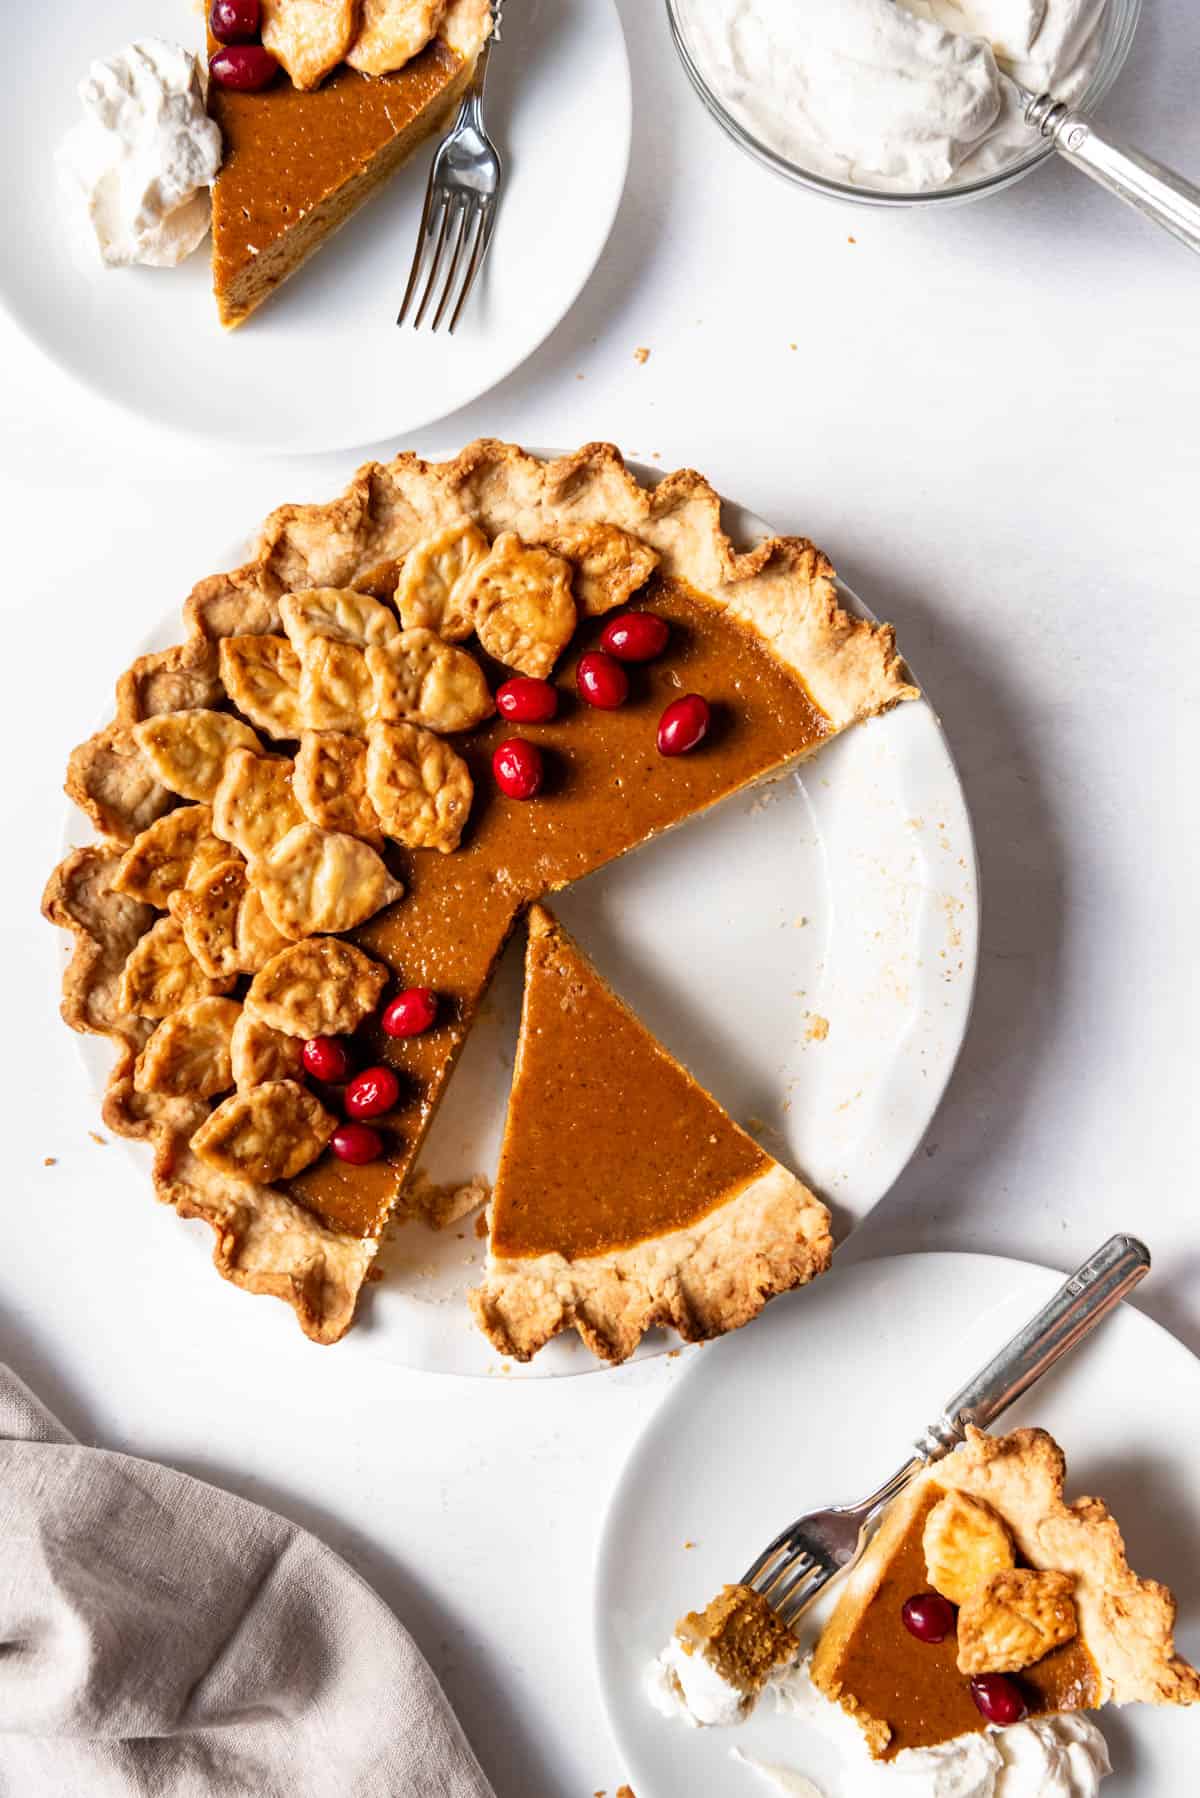 An image of a pumpkin pie with slices cut out of it and cranberries decorating the top.